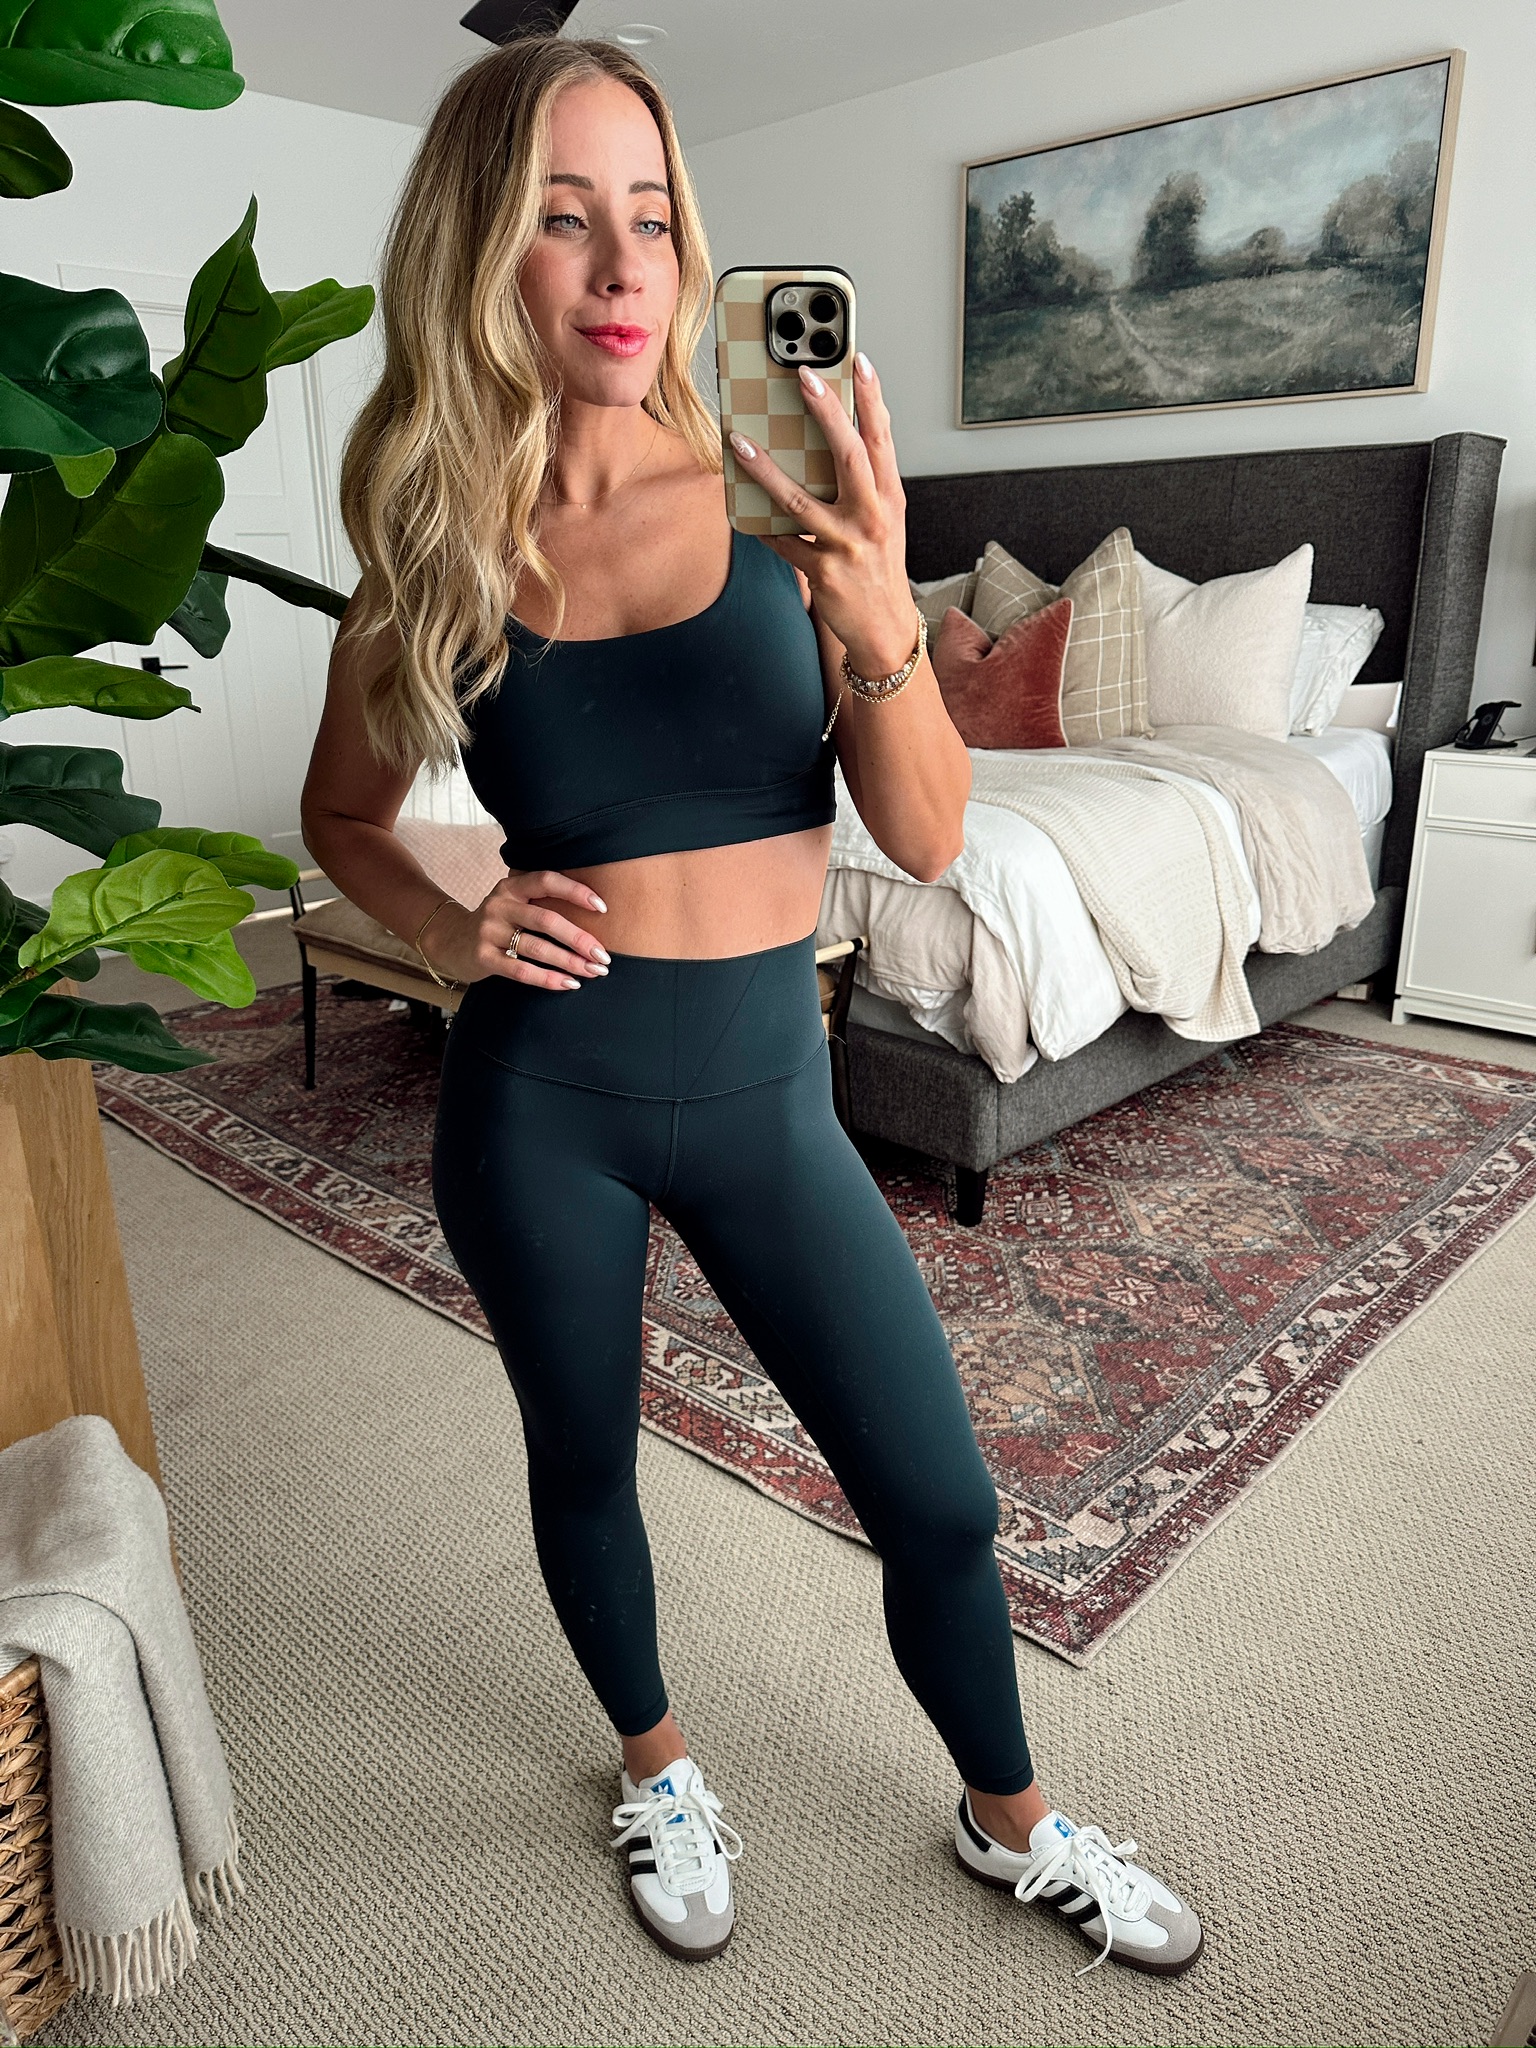 My #almondmom is a natural influencer, we loved these leggings! @Enerb